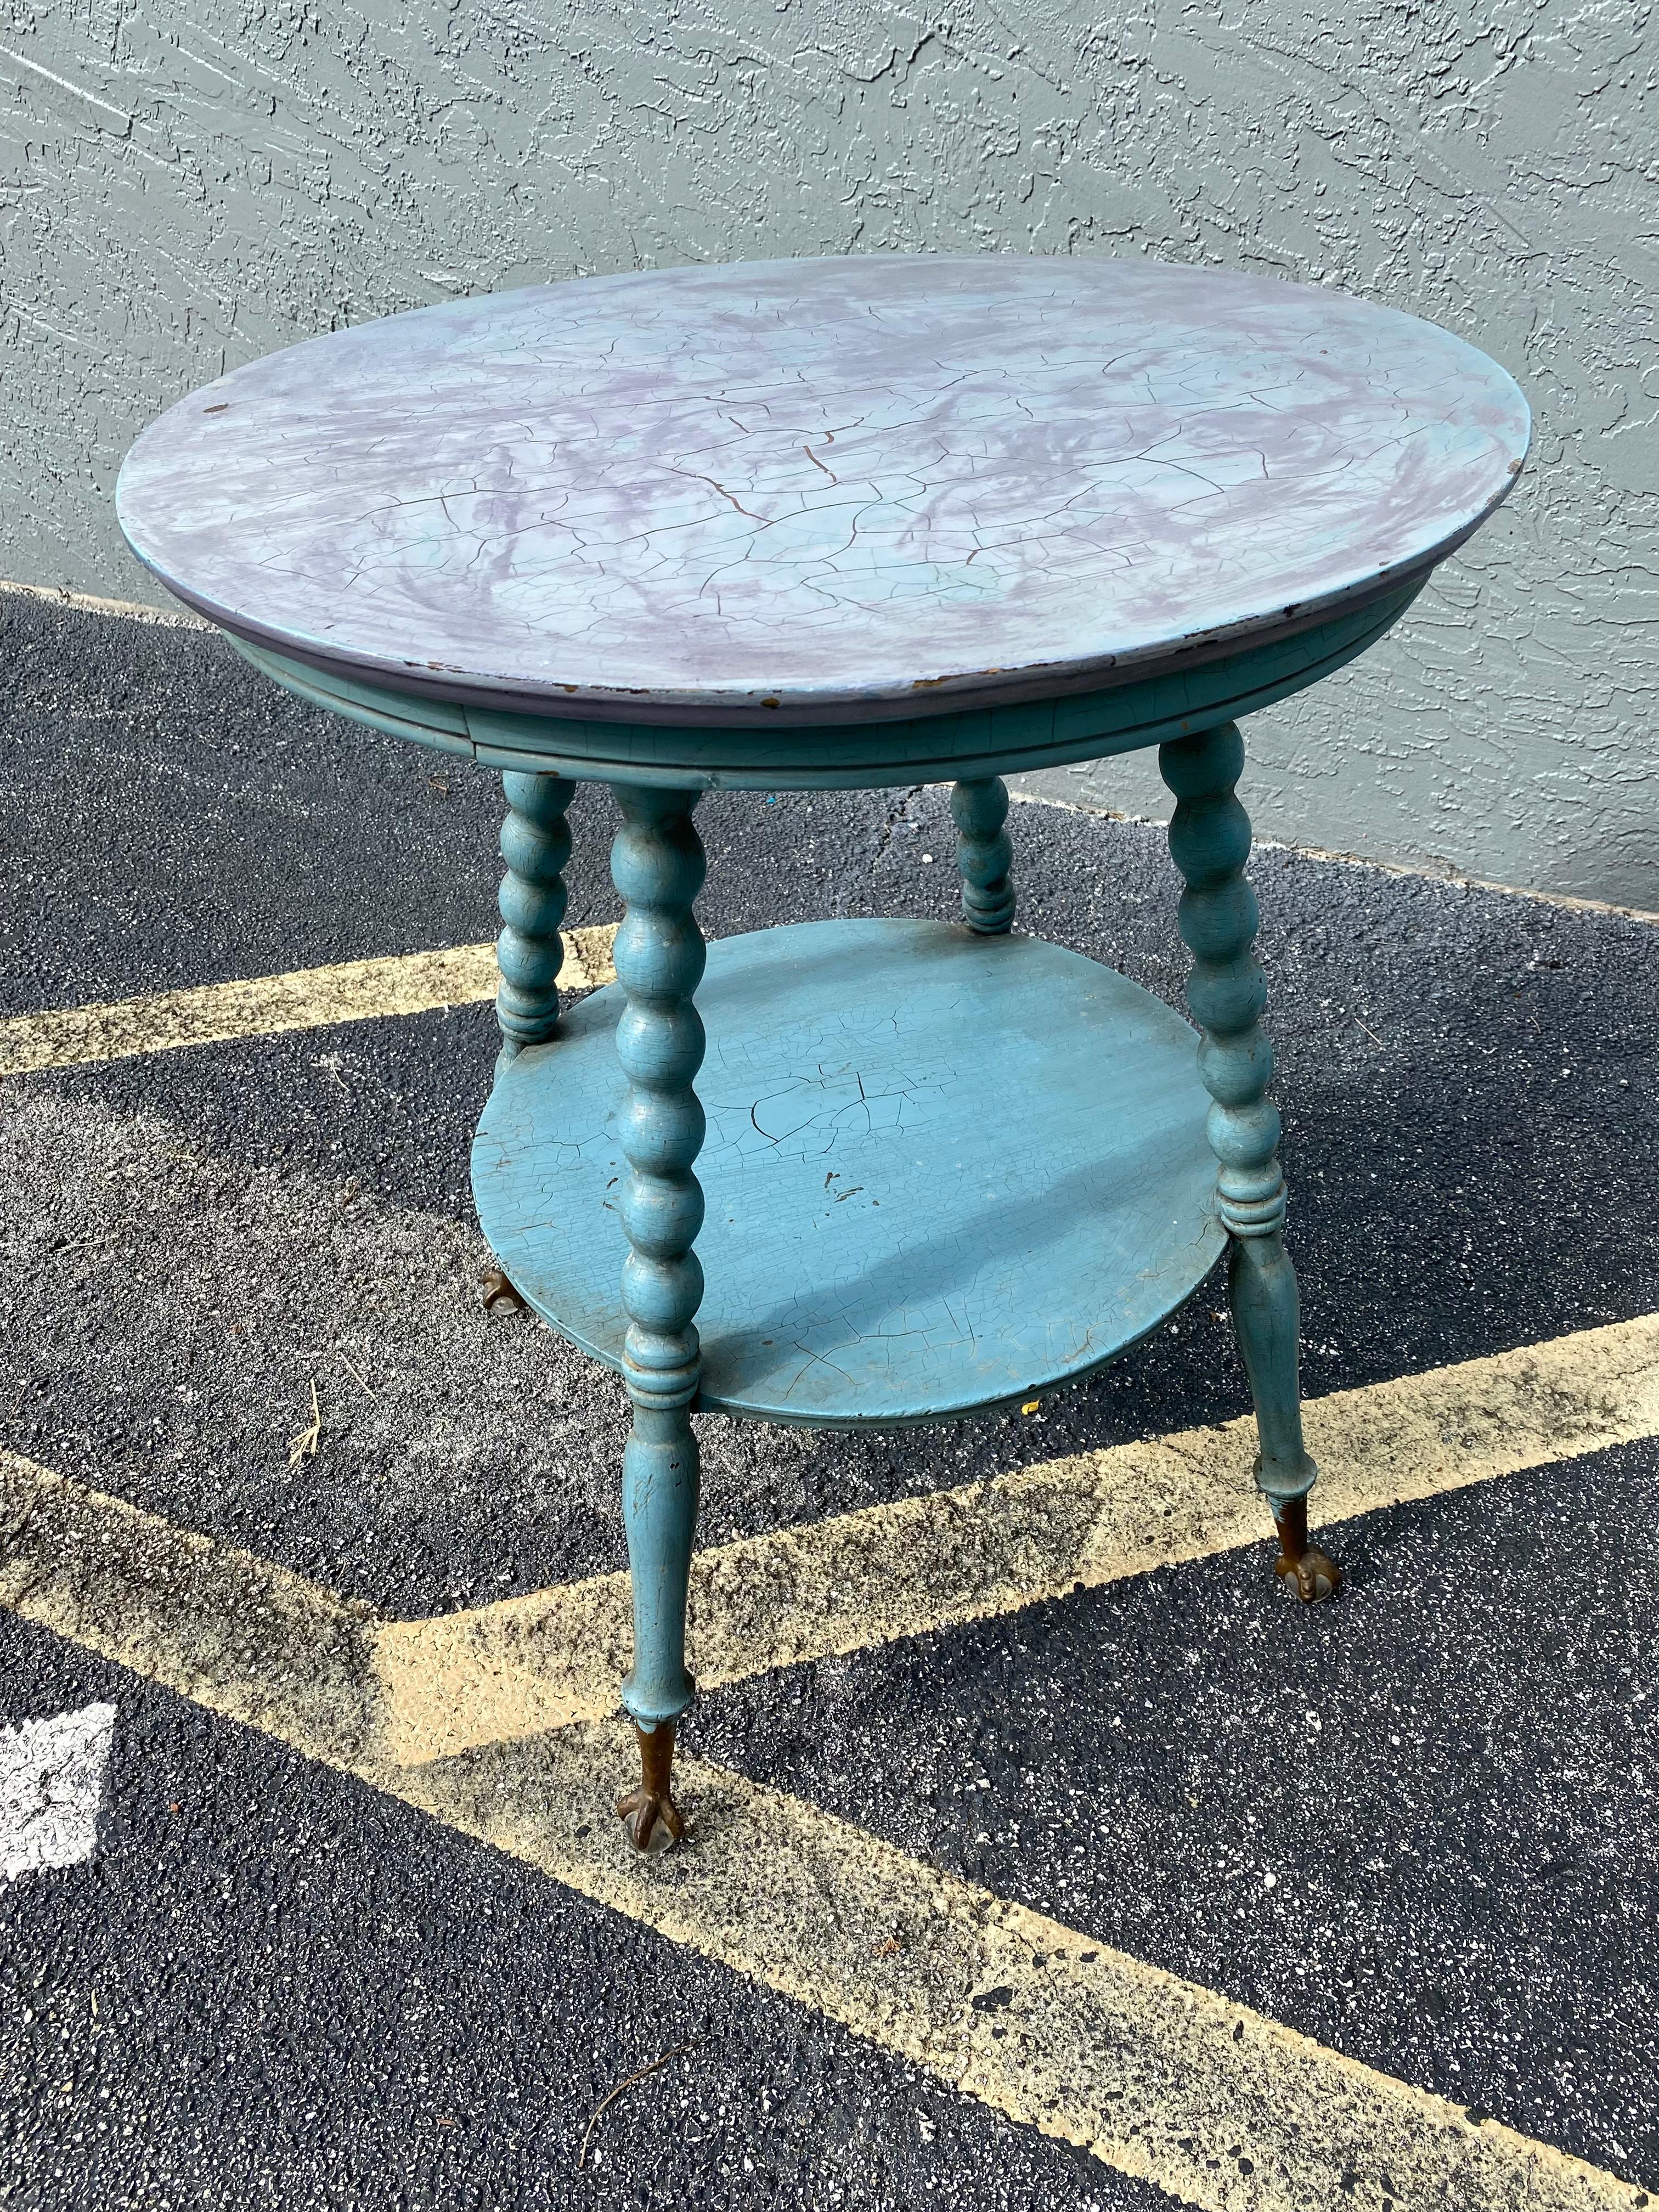 1940s Ball and Claw Round Wood Turquoise Table In Good Condition For Sale In Fort Lauderdale, FL